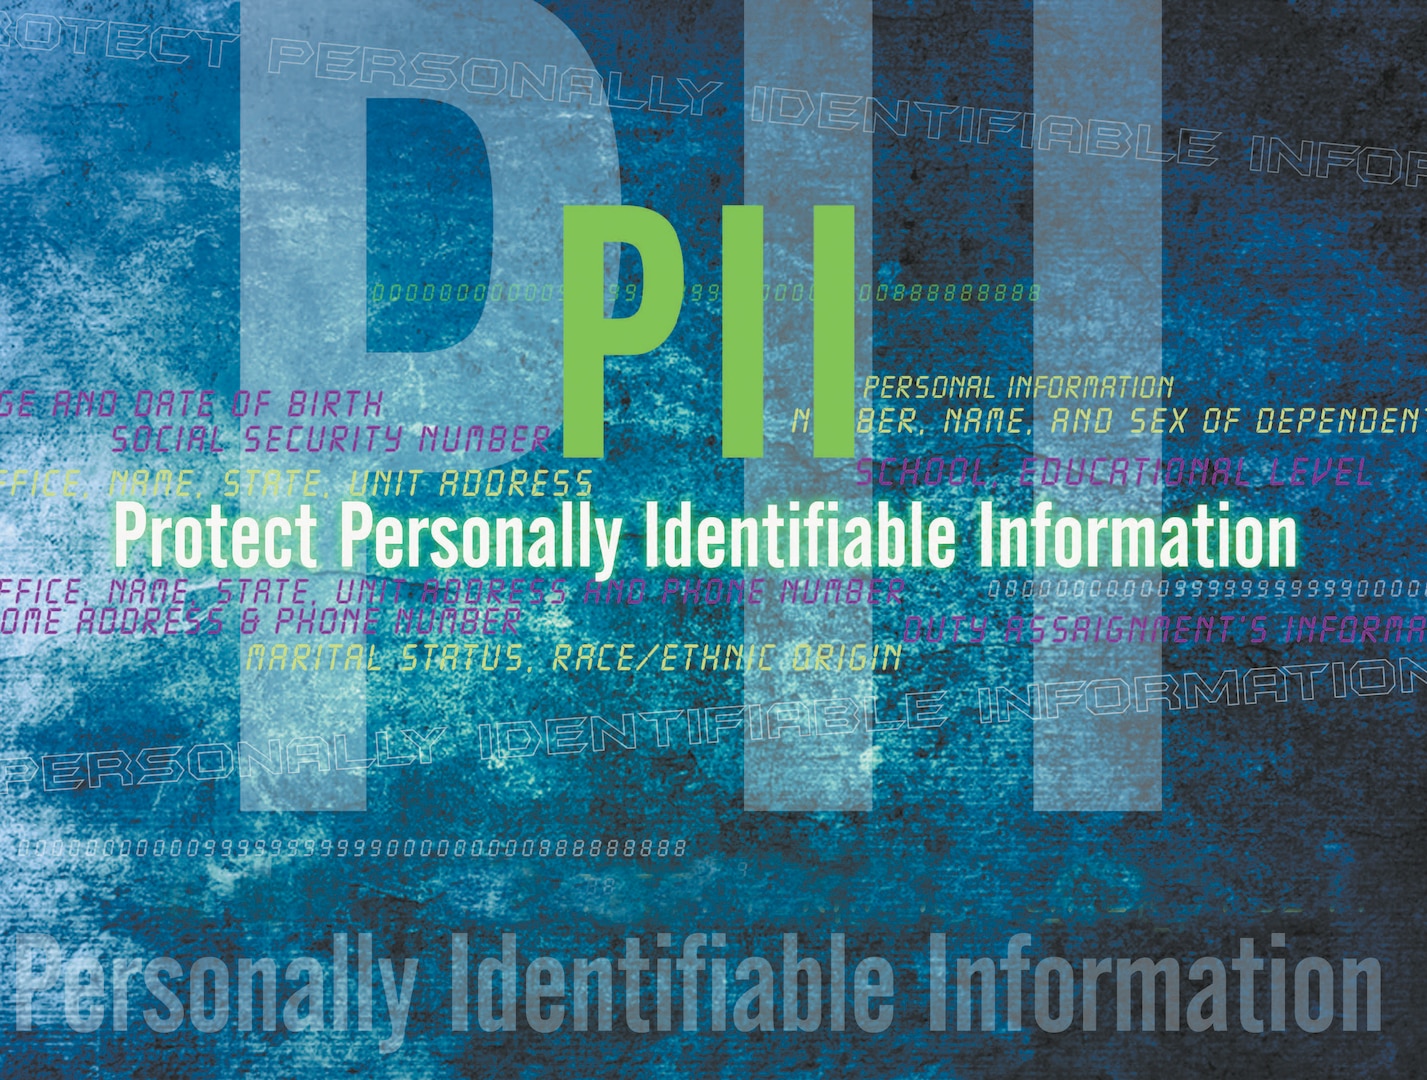 PII is unique information about an individual not releasable to the public without the written consent of the individual. Examples includes Social Security numbers, dates of birth, marital status, race or financial information. (Air Force Graphic by Naoko Shimoji)